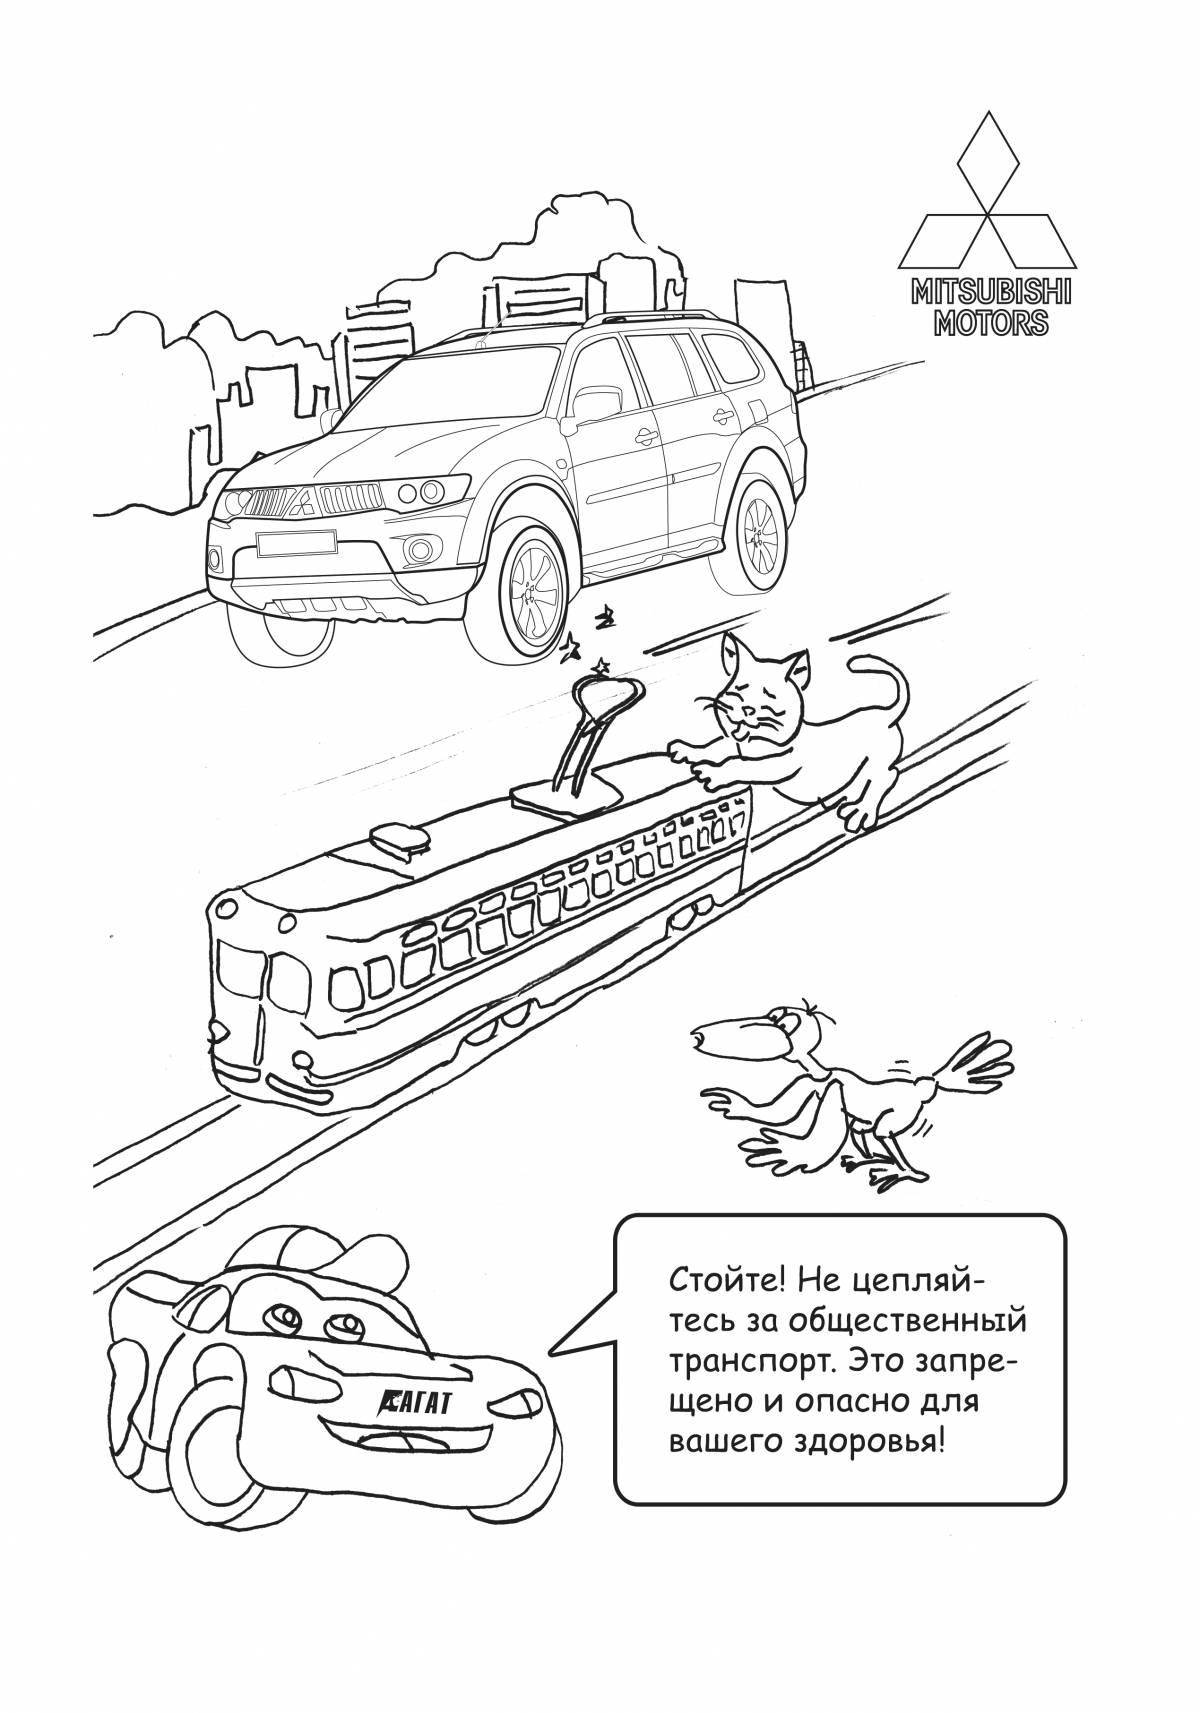 Entertaining coloring book traffic rules for schoolchildren